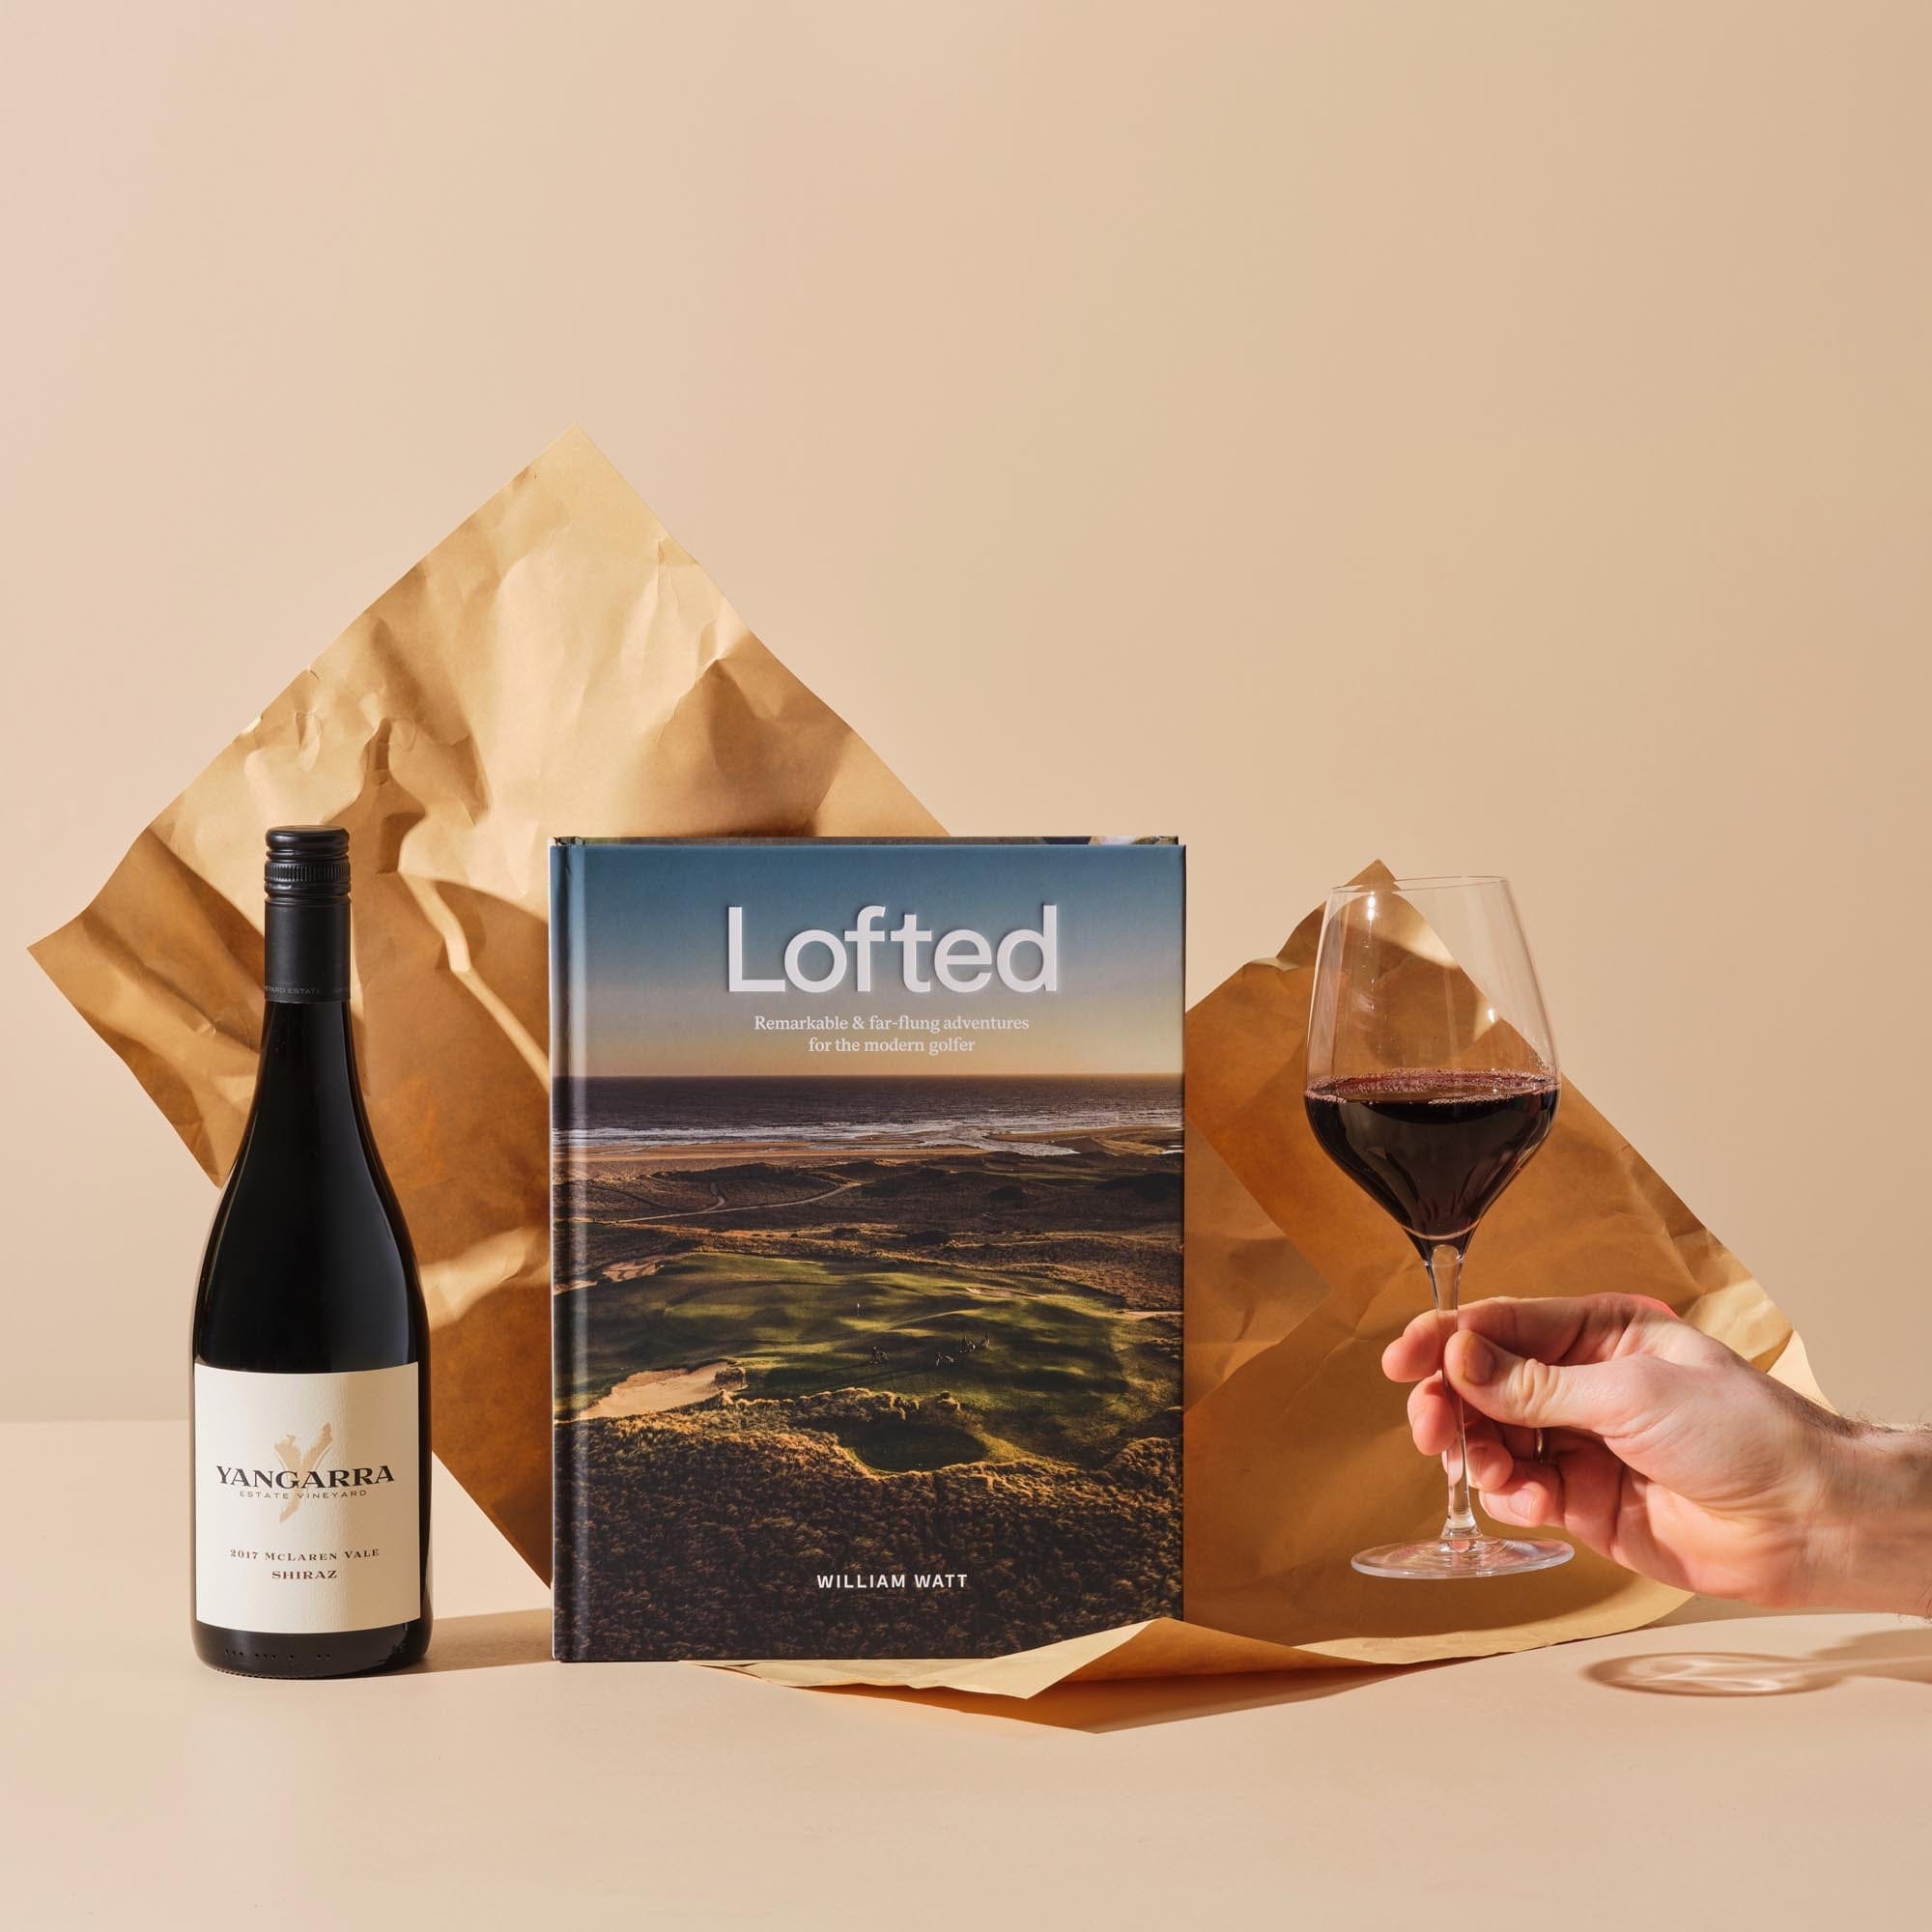 This image features Handsel's 'Par None' gift bundle that includes the cover of Lofted and 2019 Yangarra Shiraz poured into wine glass